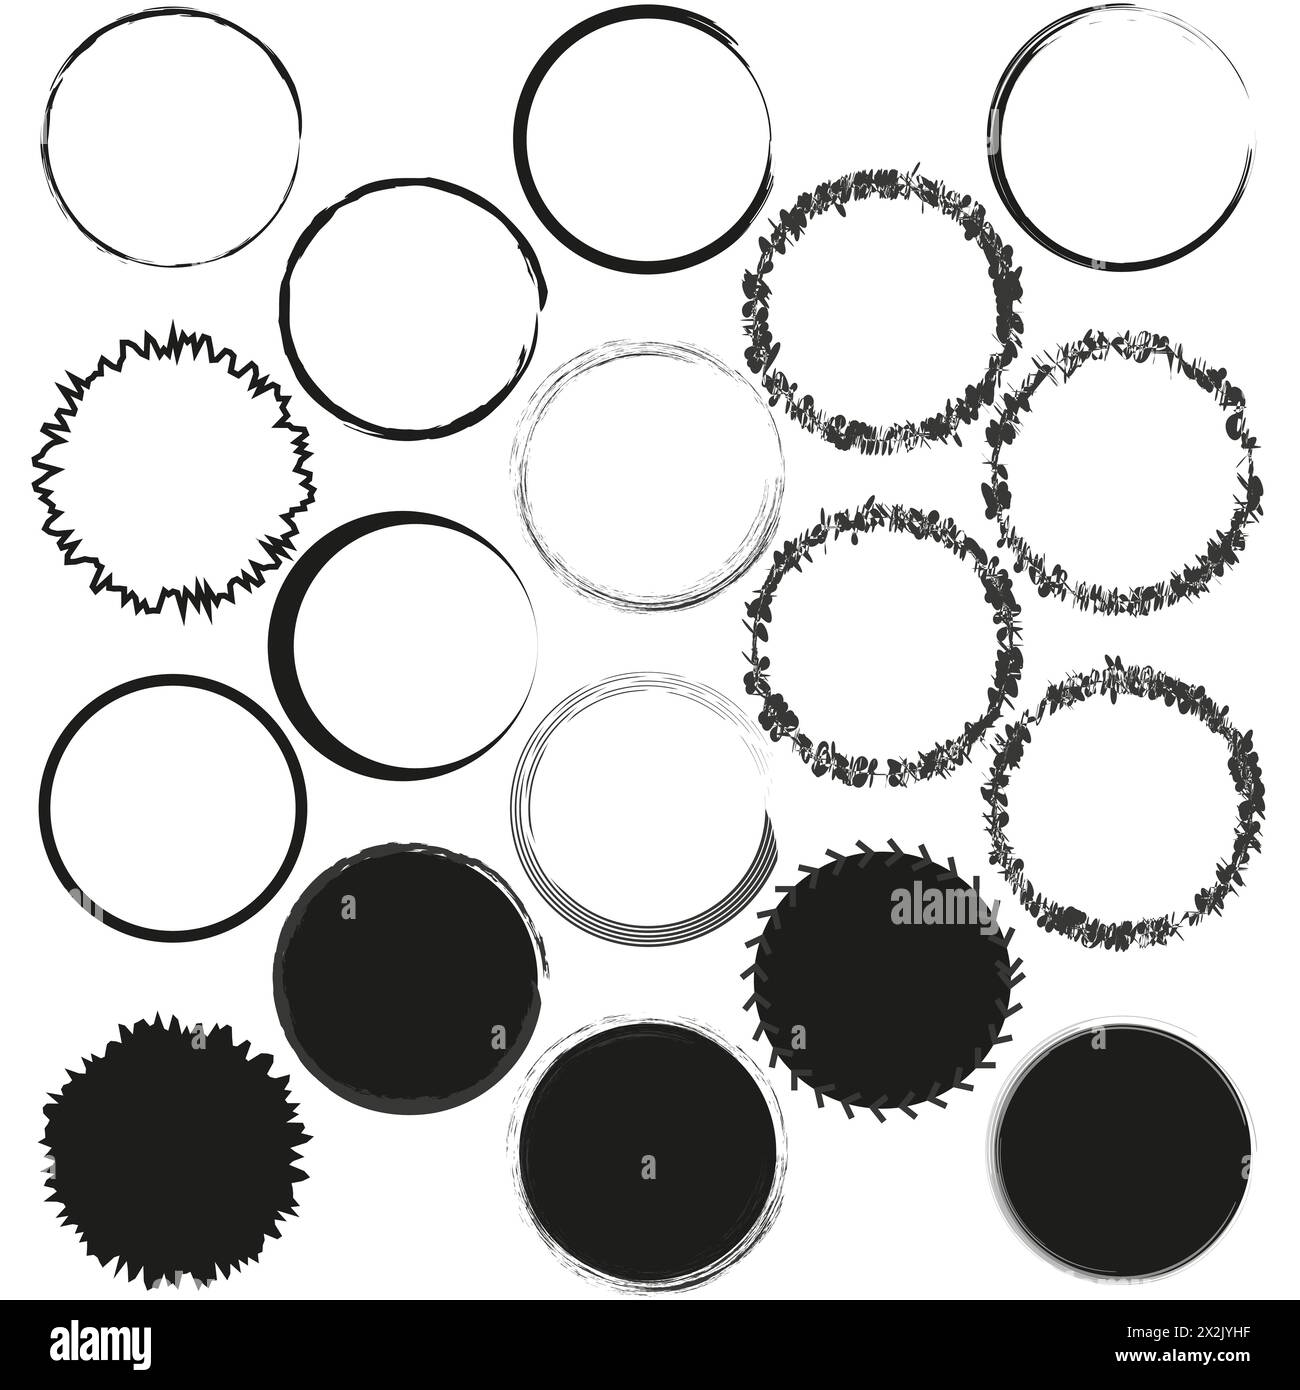 Variety of grunge circle outlines. Set of round stamps and badges. Ink brush borders. Vector illustration. EPS 10. Stock Vector